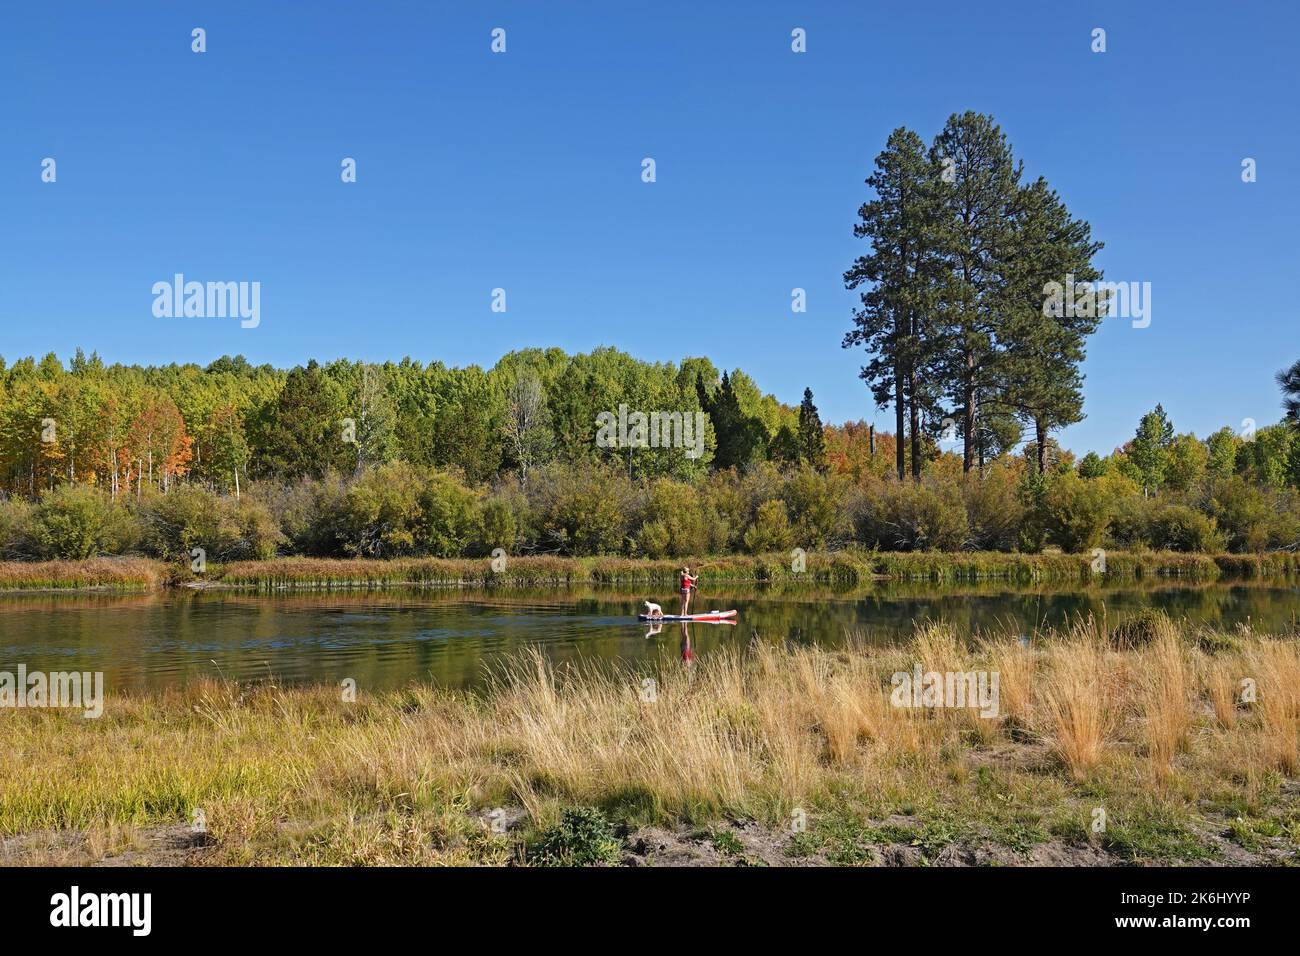 Stand-up paddleboarding is popular on the Deschutes River near Bend, Oregon, especially in the autumn when the aspen trees along the river begin to tu Stock Photo